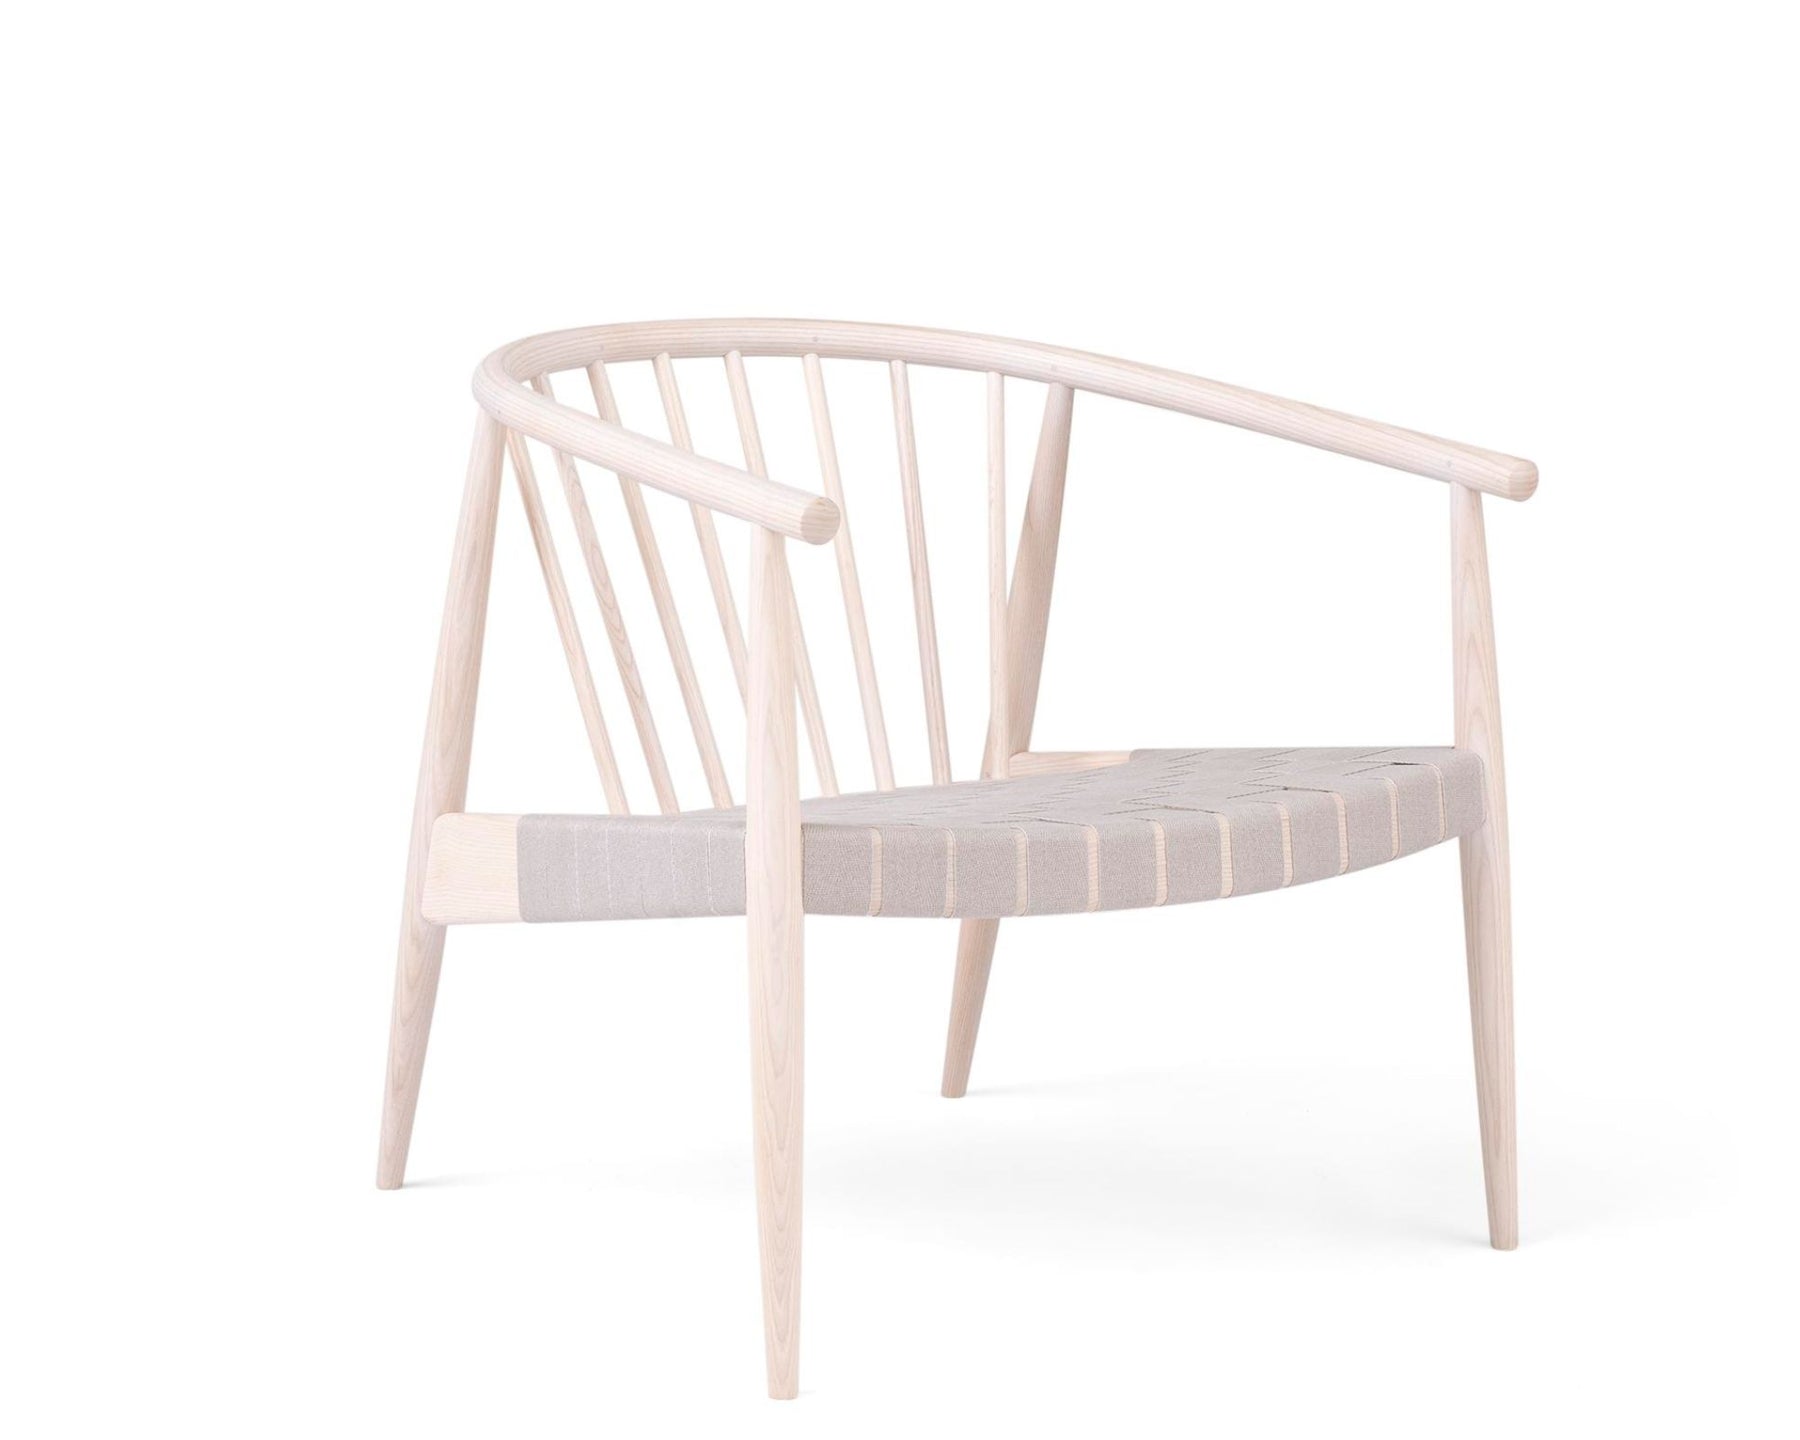 Reprise Chair with Webbed Seat | DSHOP